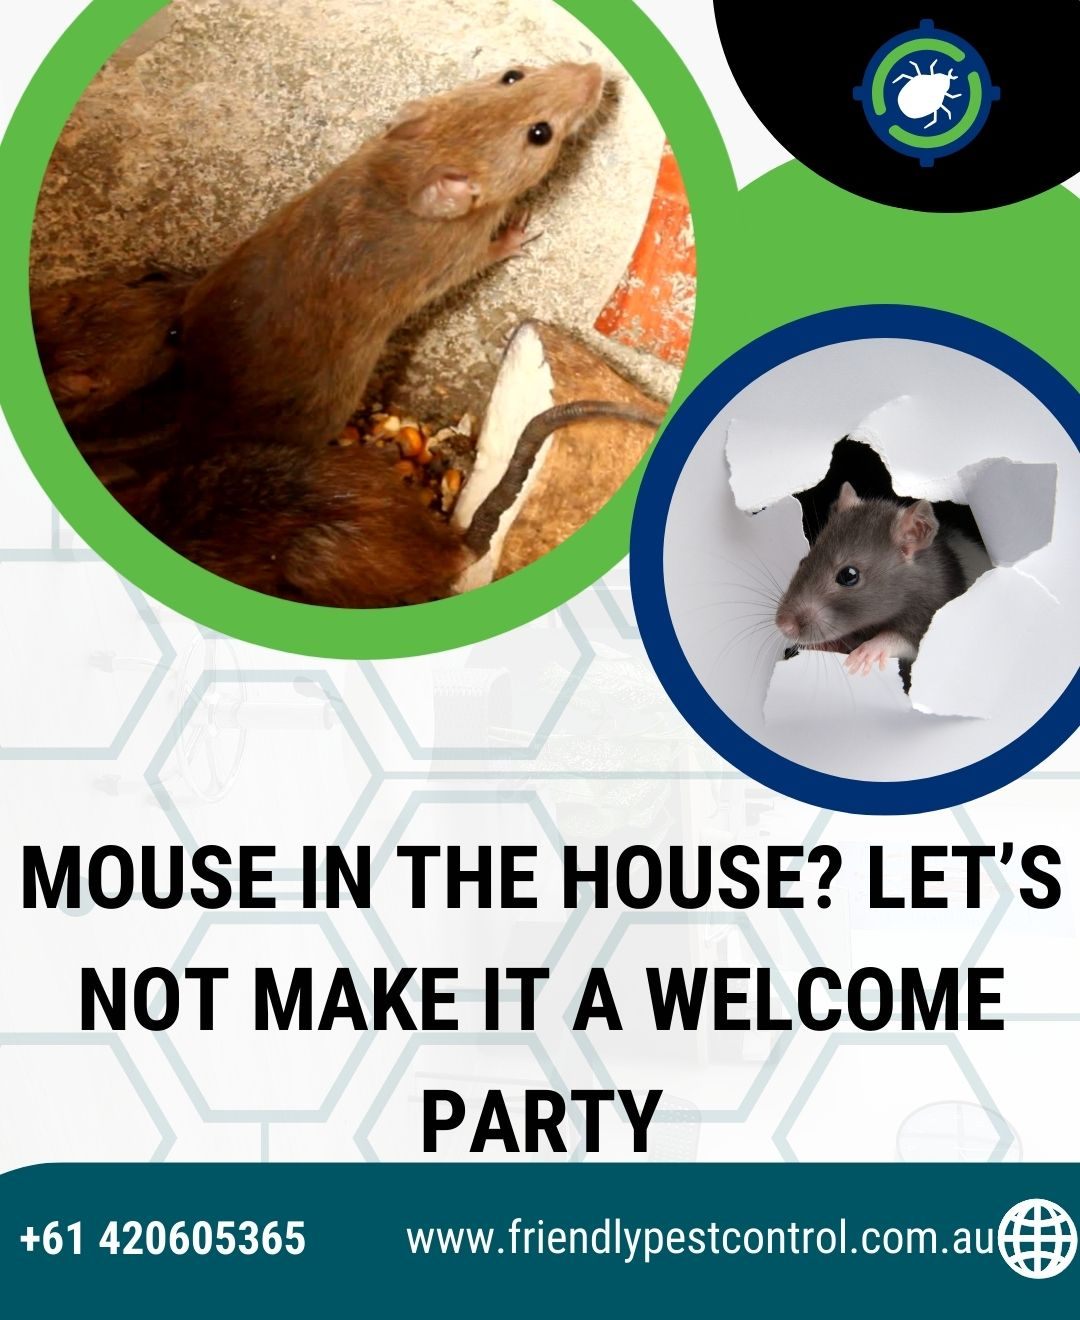 Rodent Control service in Melbourne